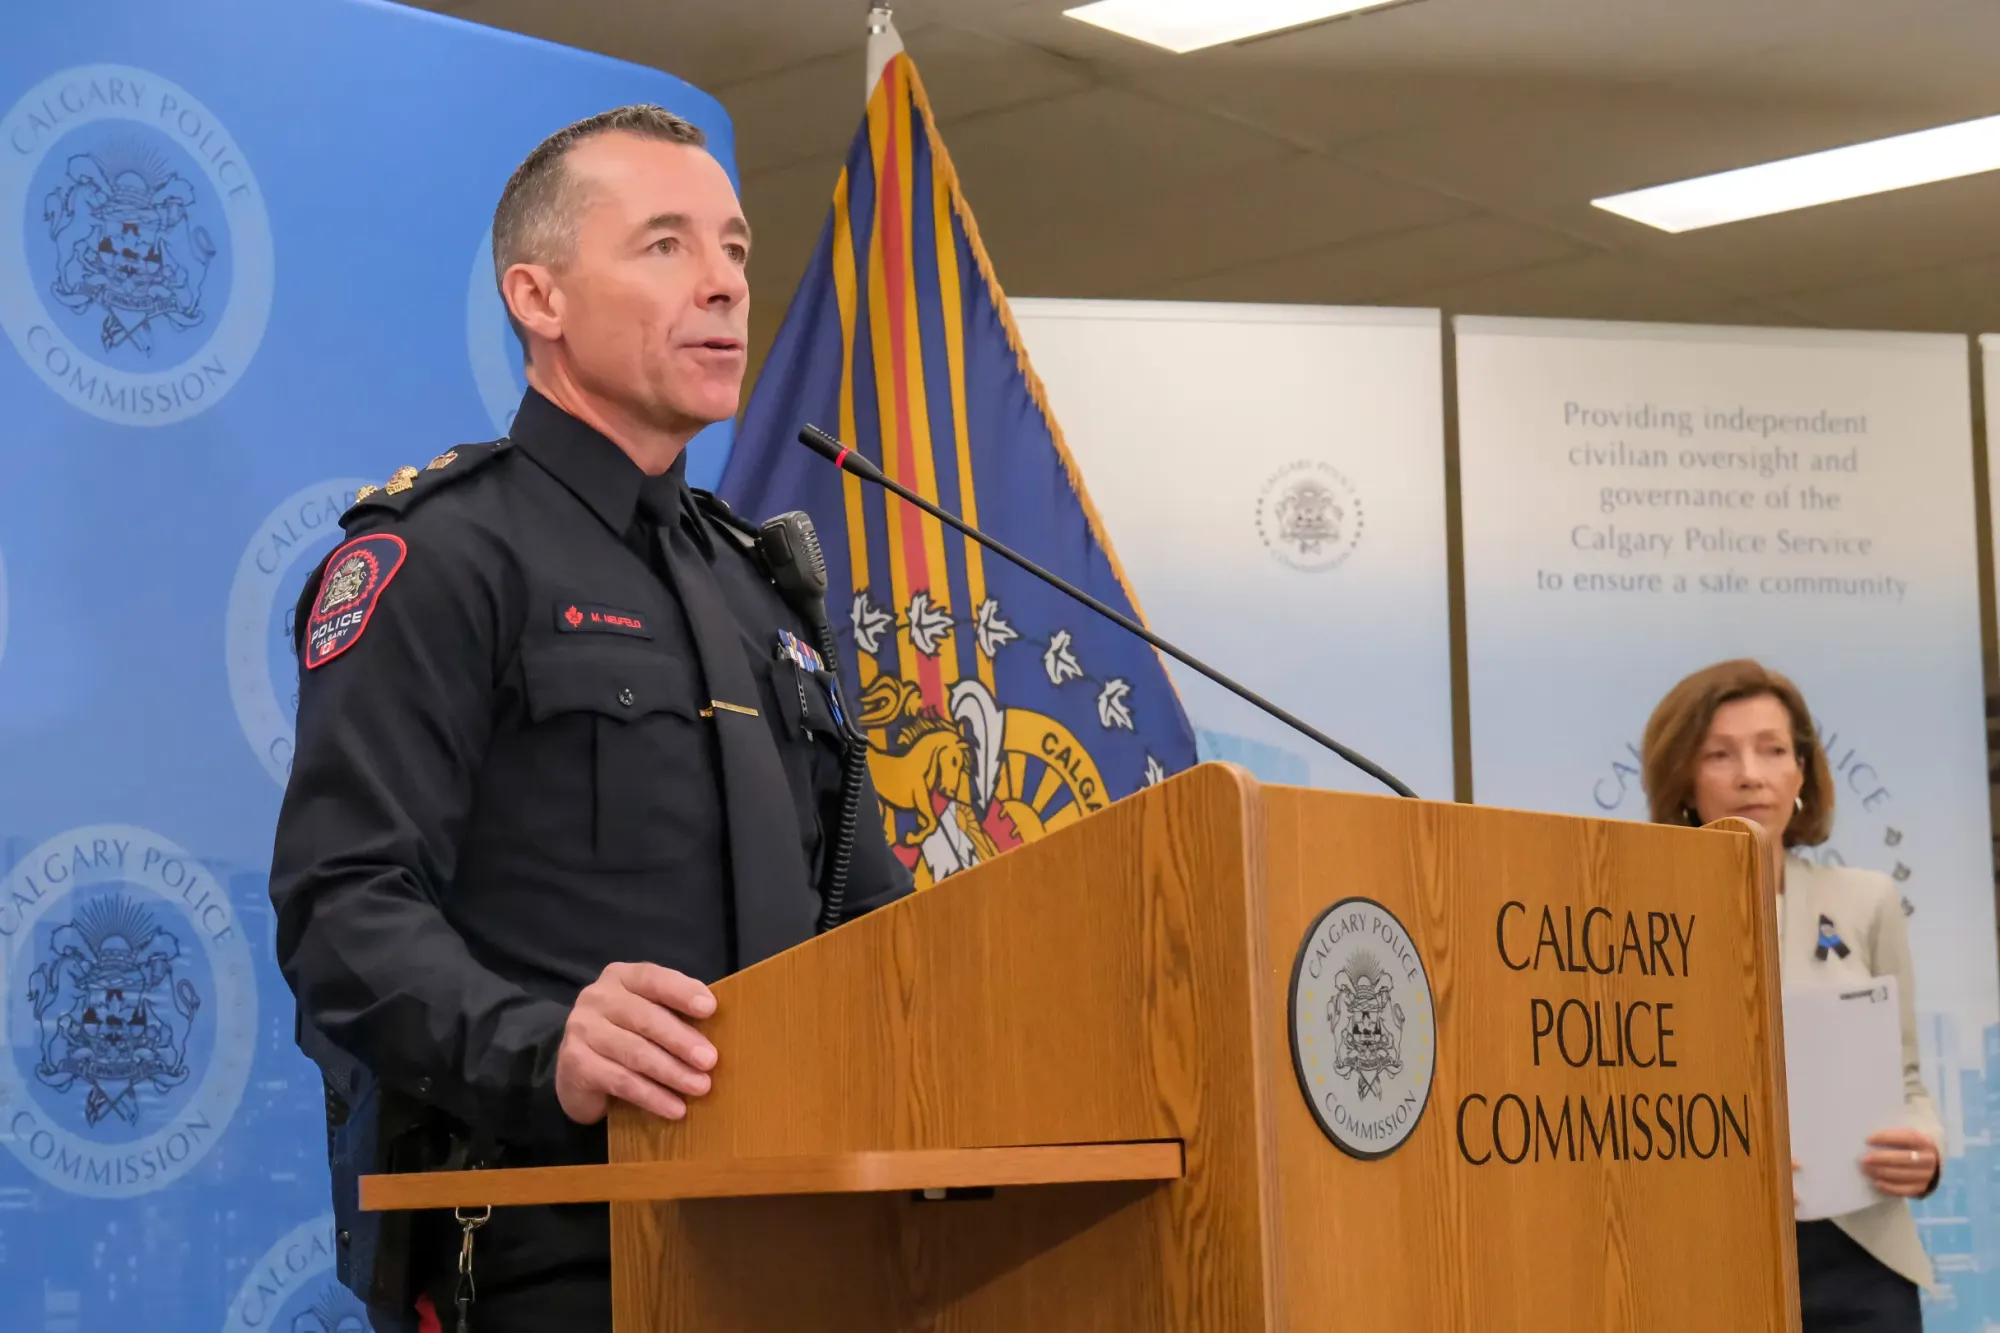 Part 1 - How Calgary Police leadership cheated the census